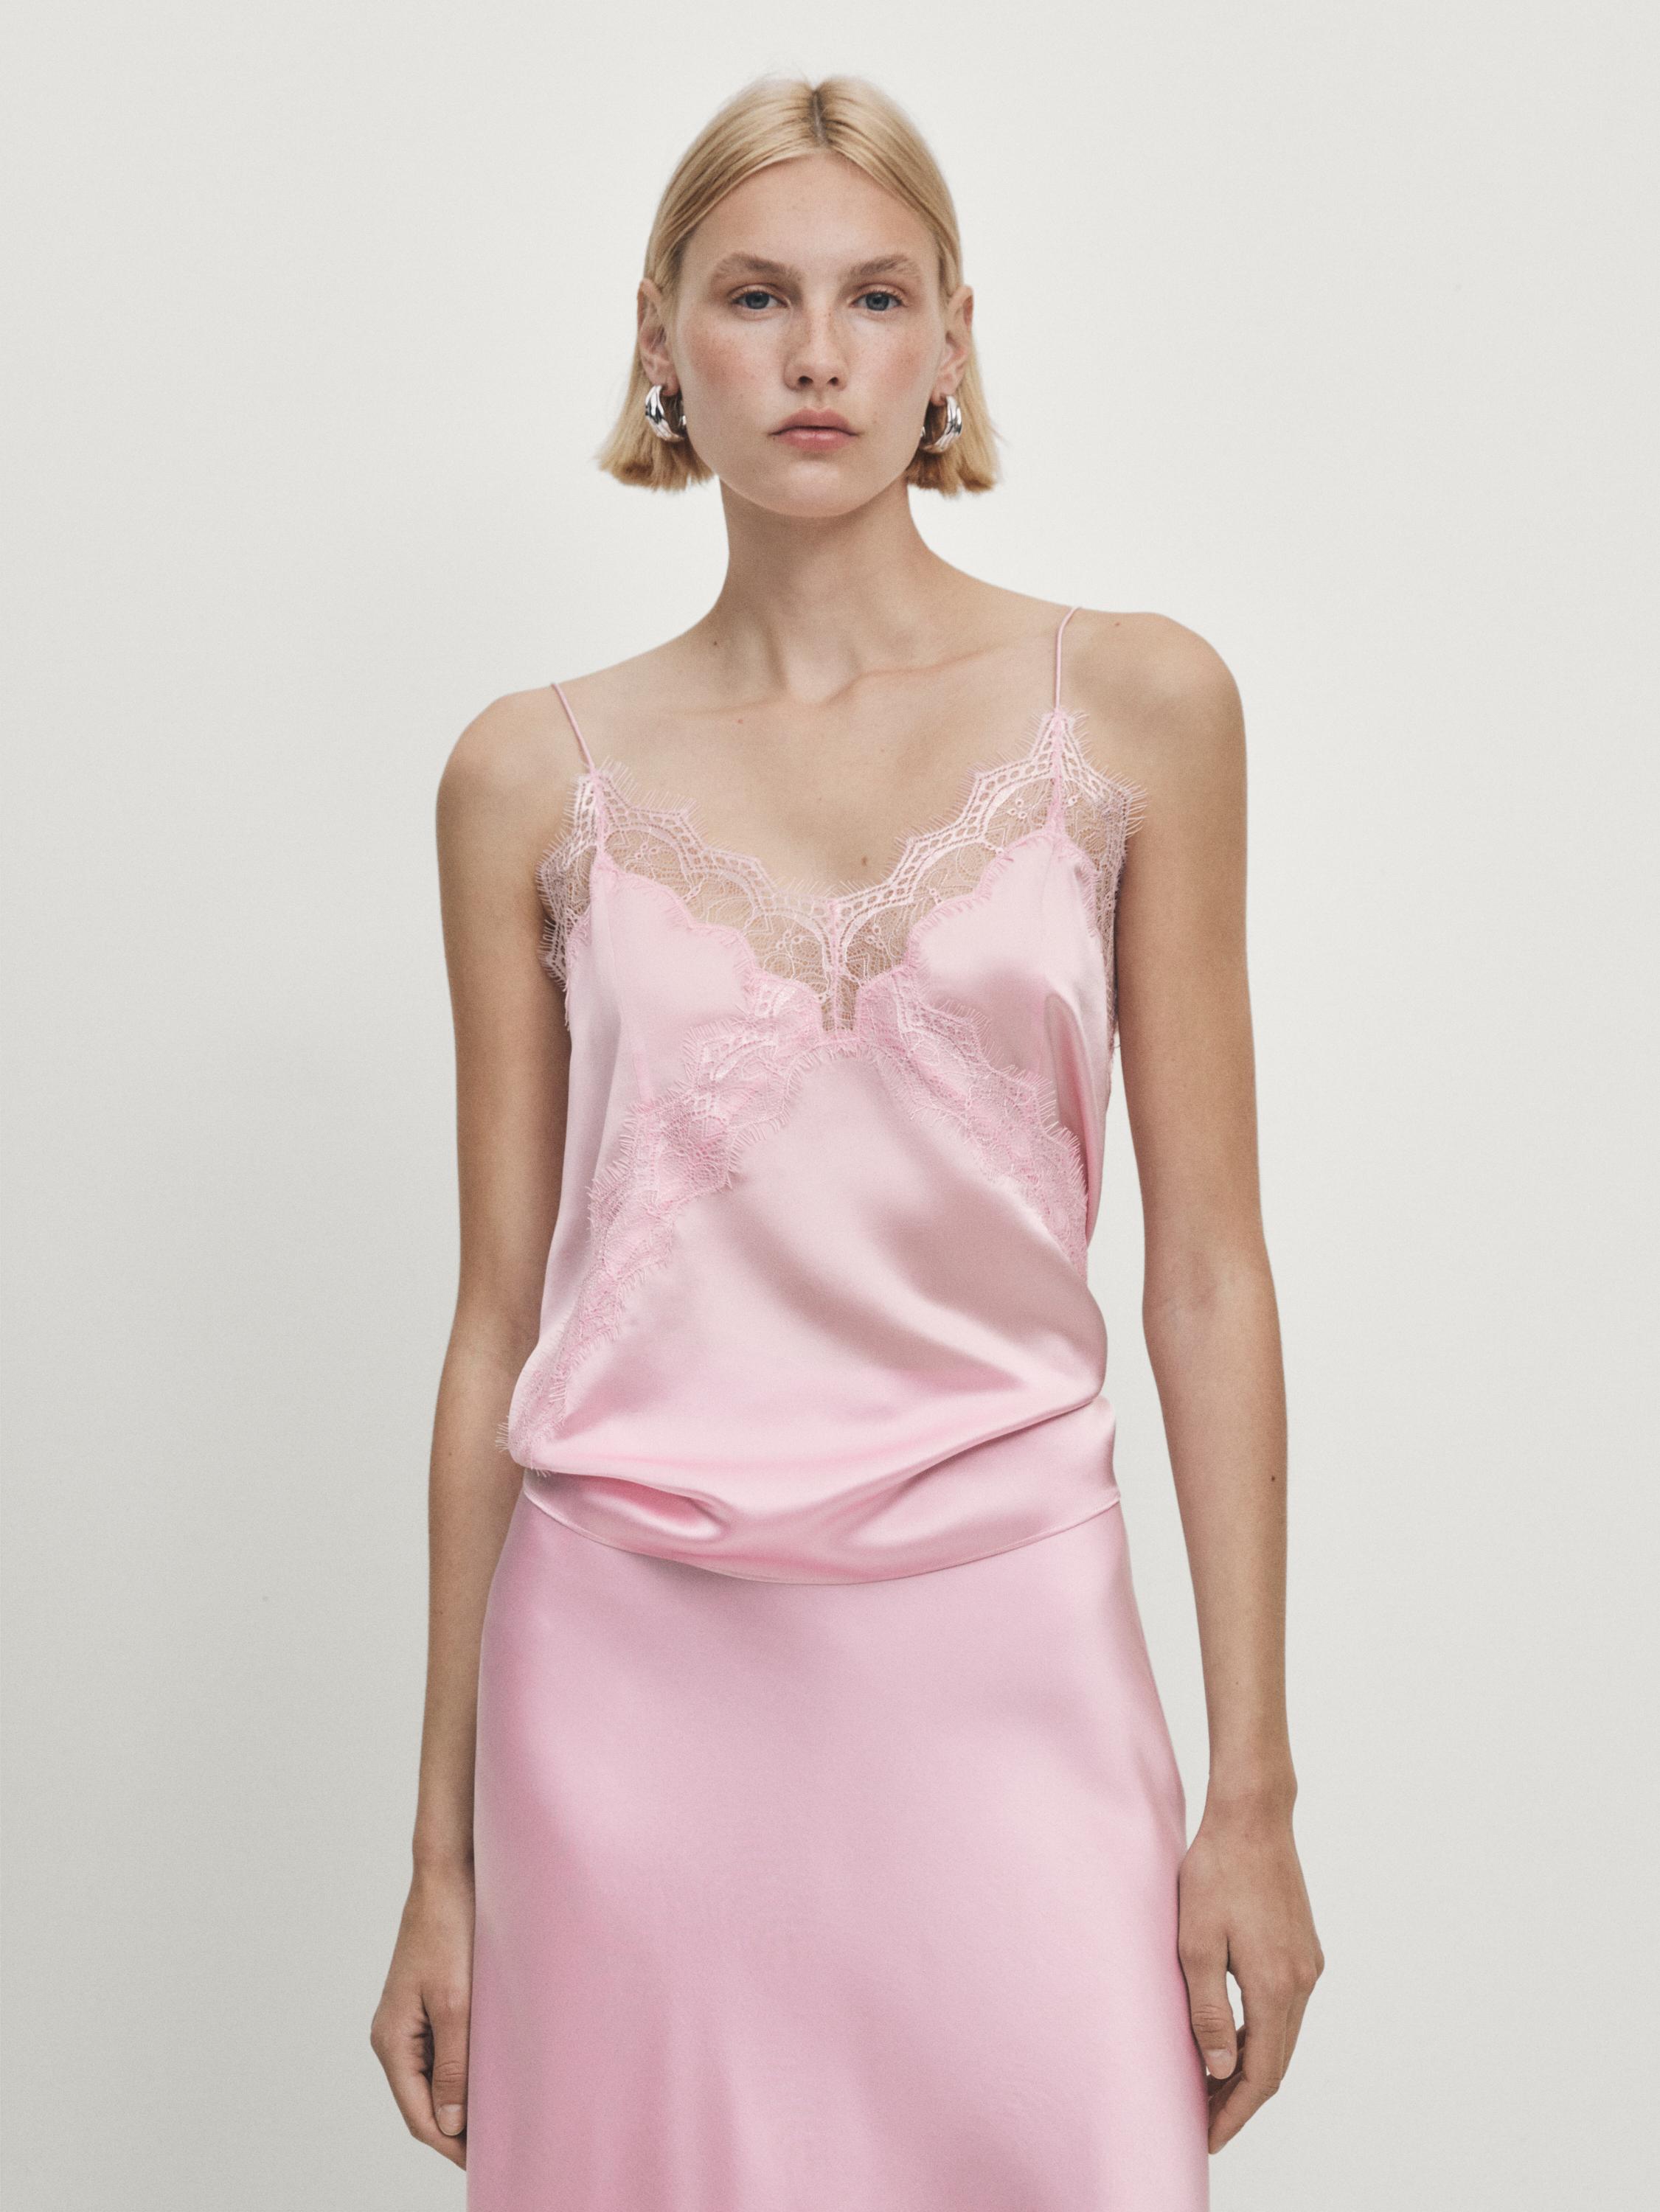 Camisole top with lace detail - Studio - Pale pink | ZARA United 